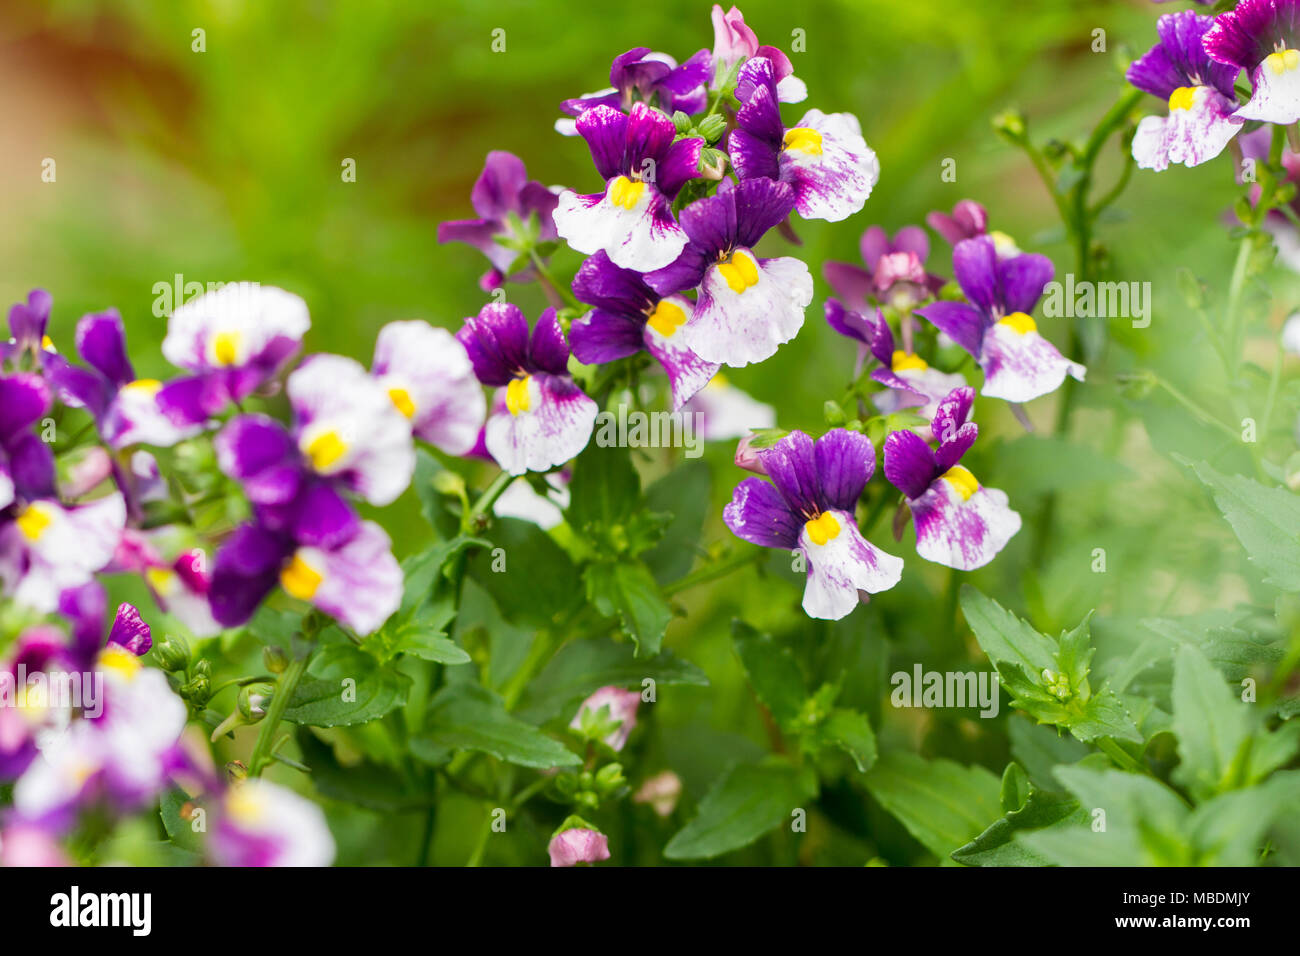 Nemesia flowers growing in an English garden in summer, United Kingdom Stock Photo